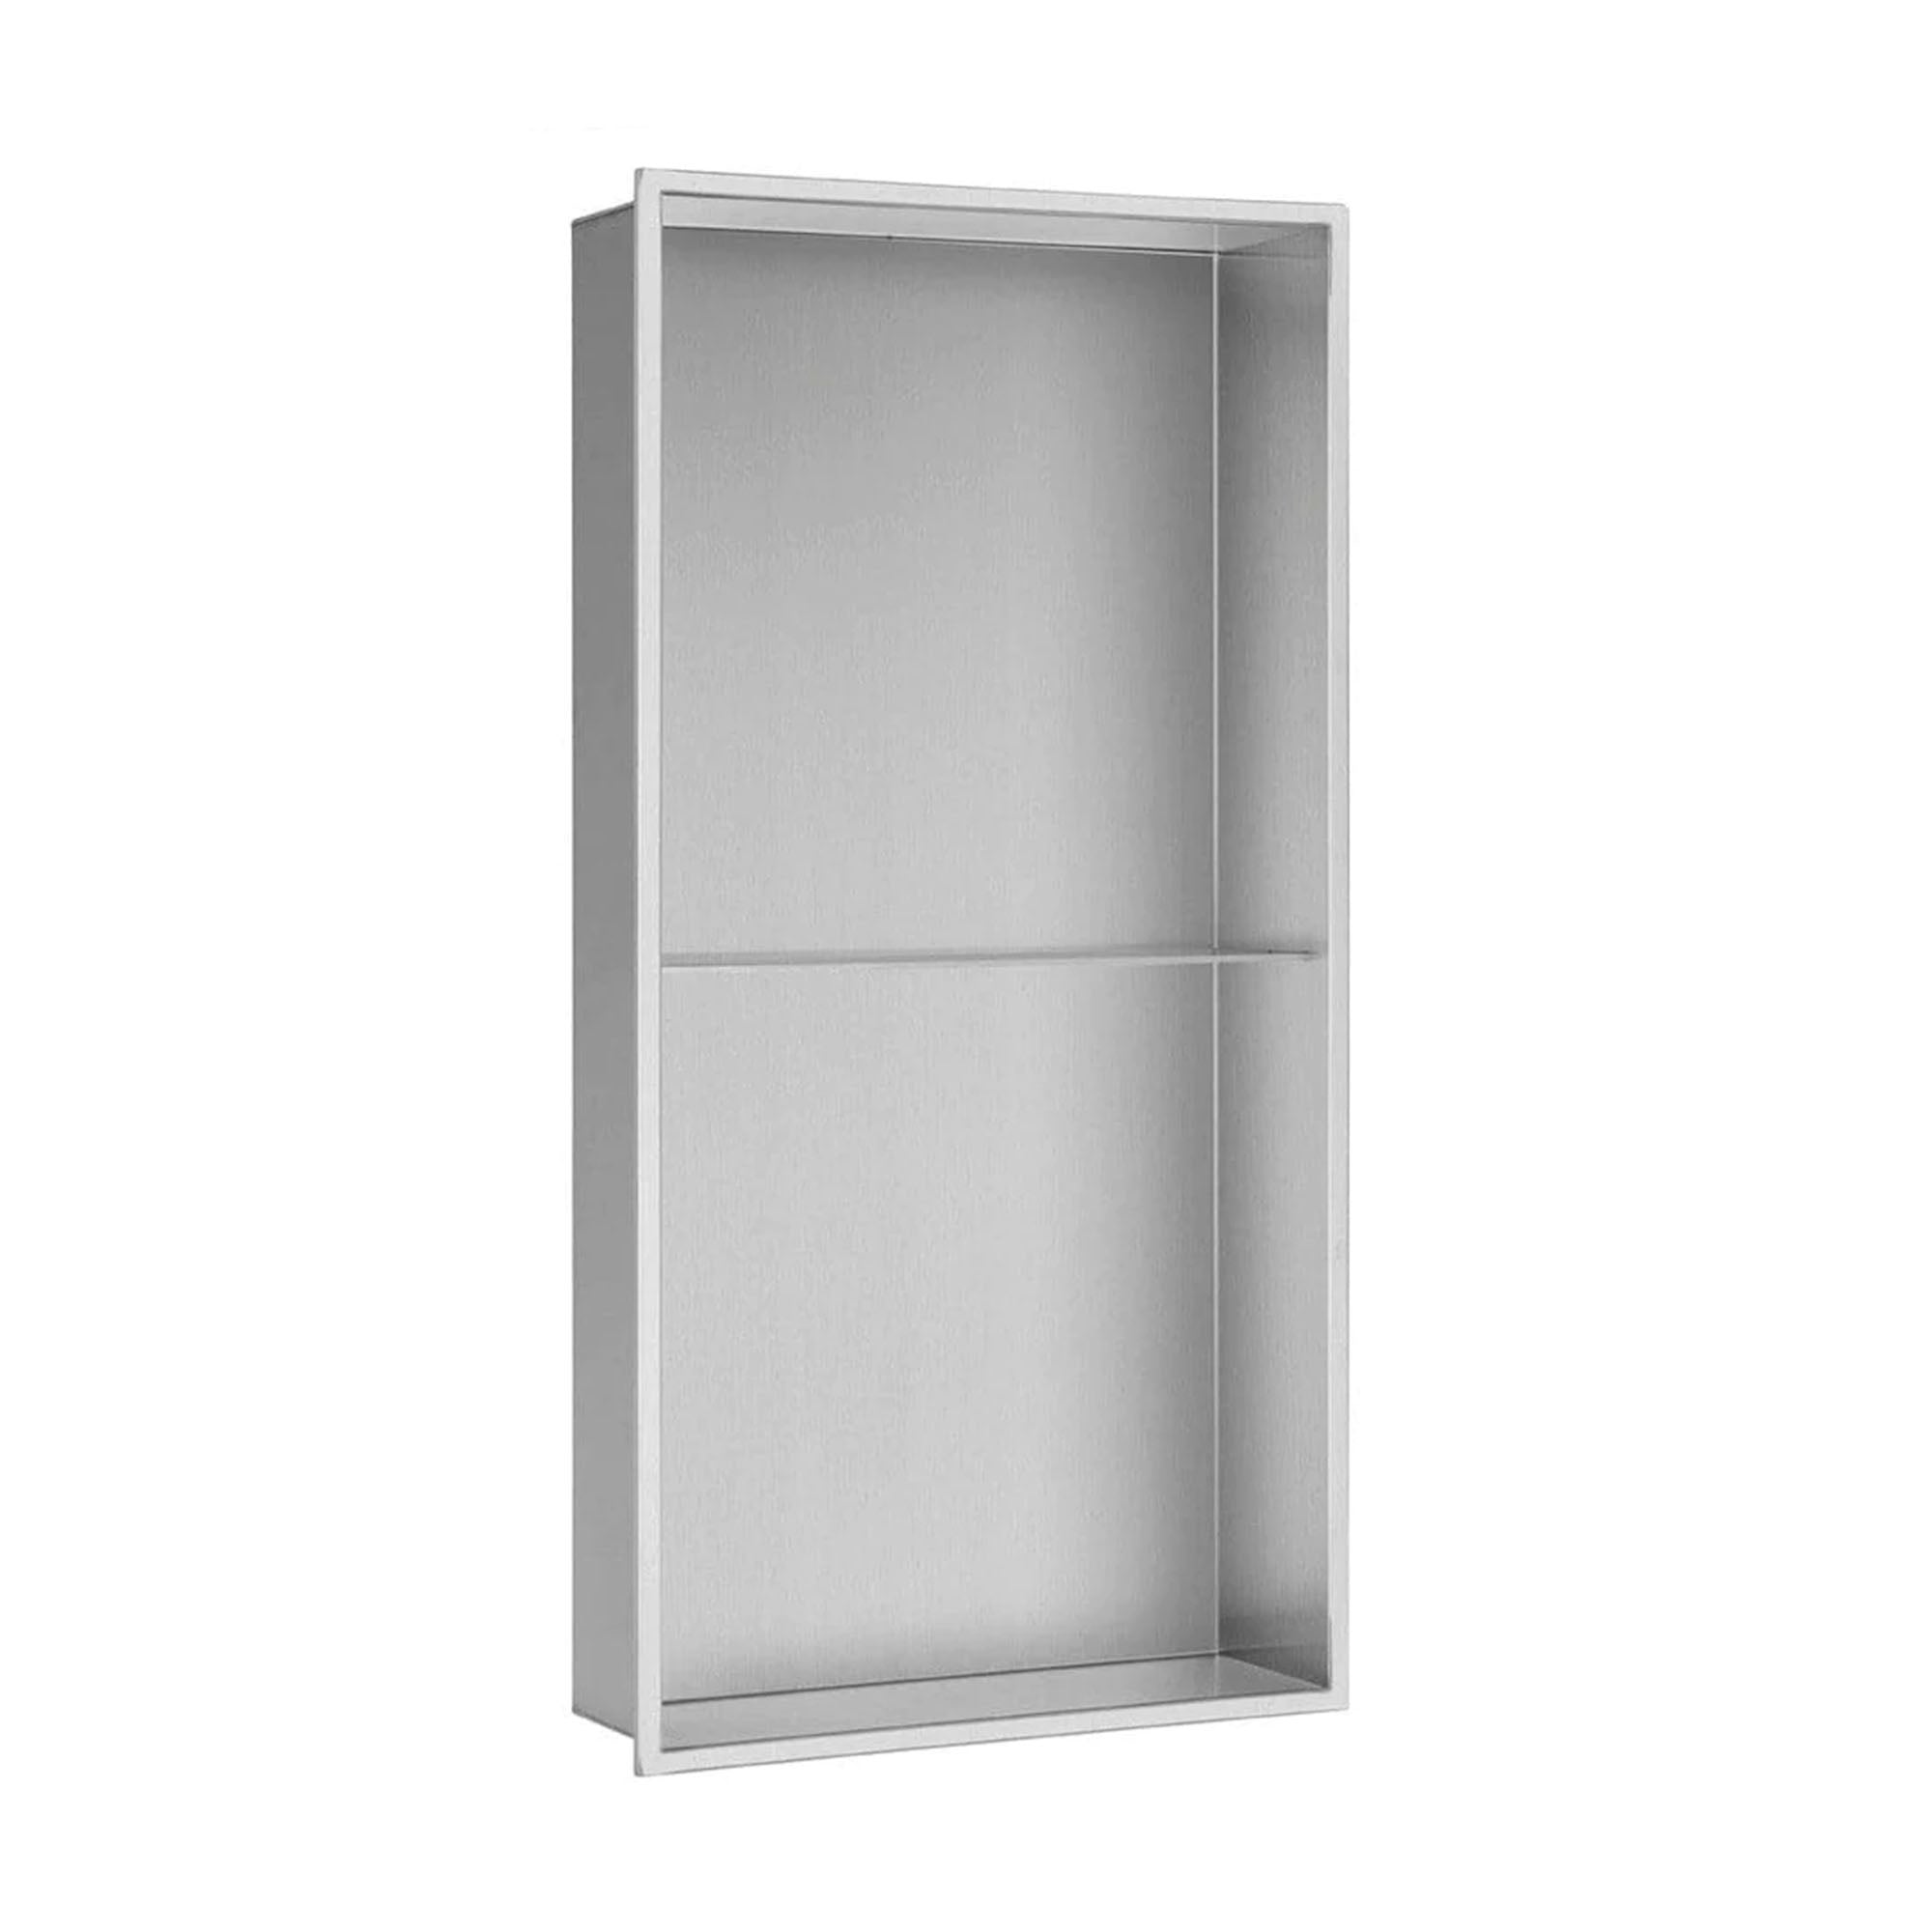 SHOWER WALL NICHE - 12 X 24" STAINLESS (WITH SHELF)